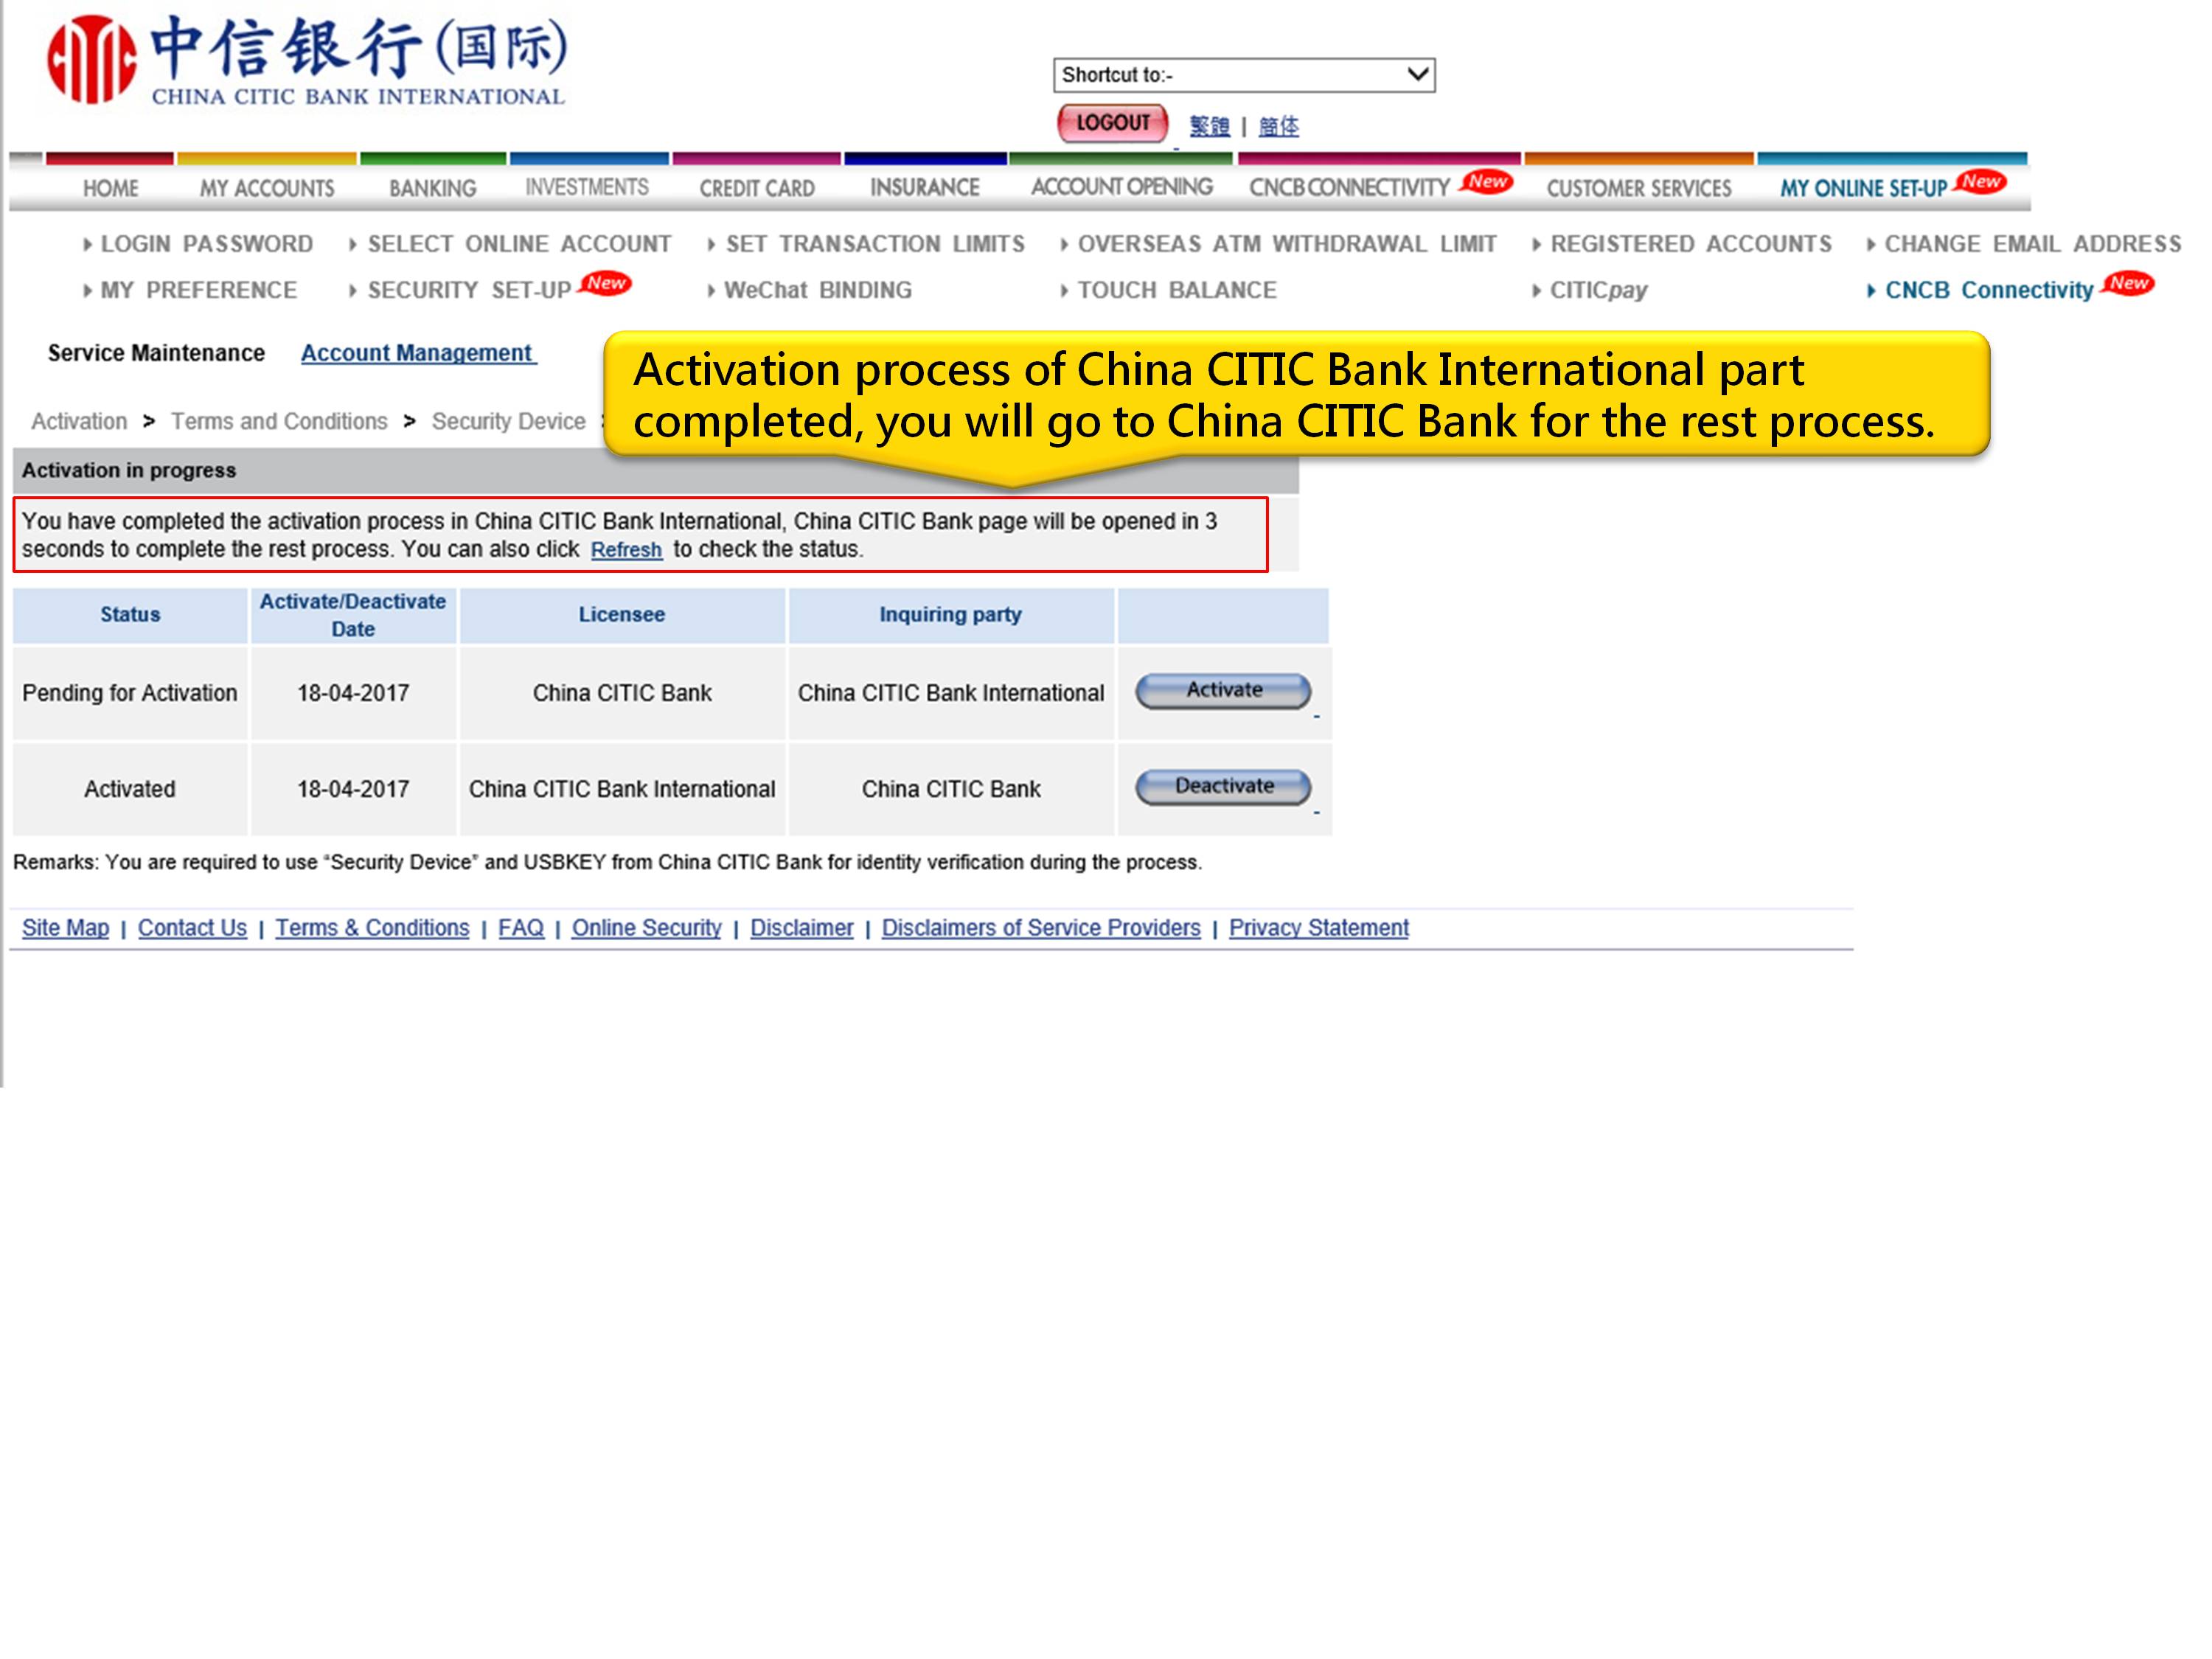 Activation process of China CITIC Bank International part completed, you will go to China CITIC Bank for the rest process